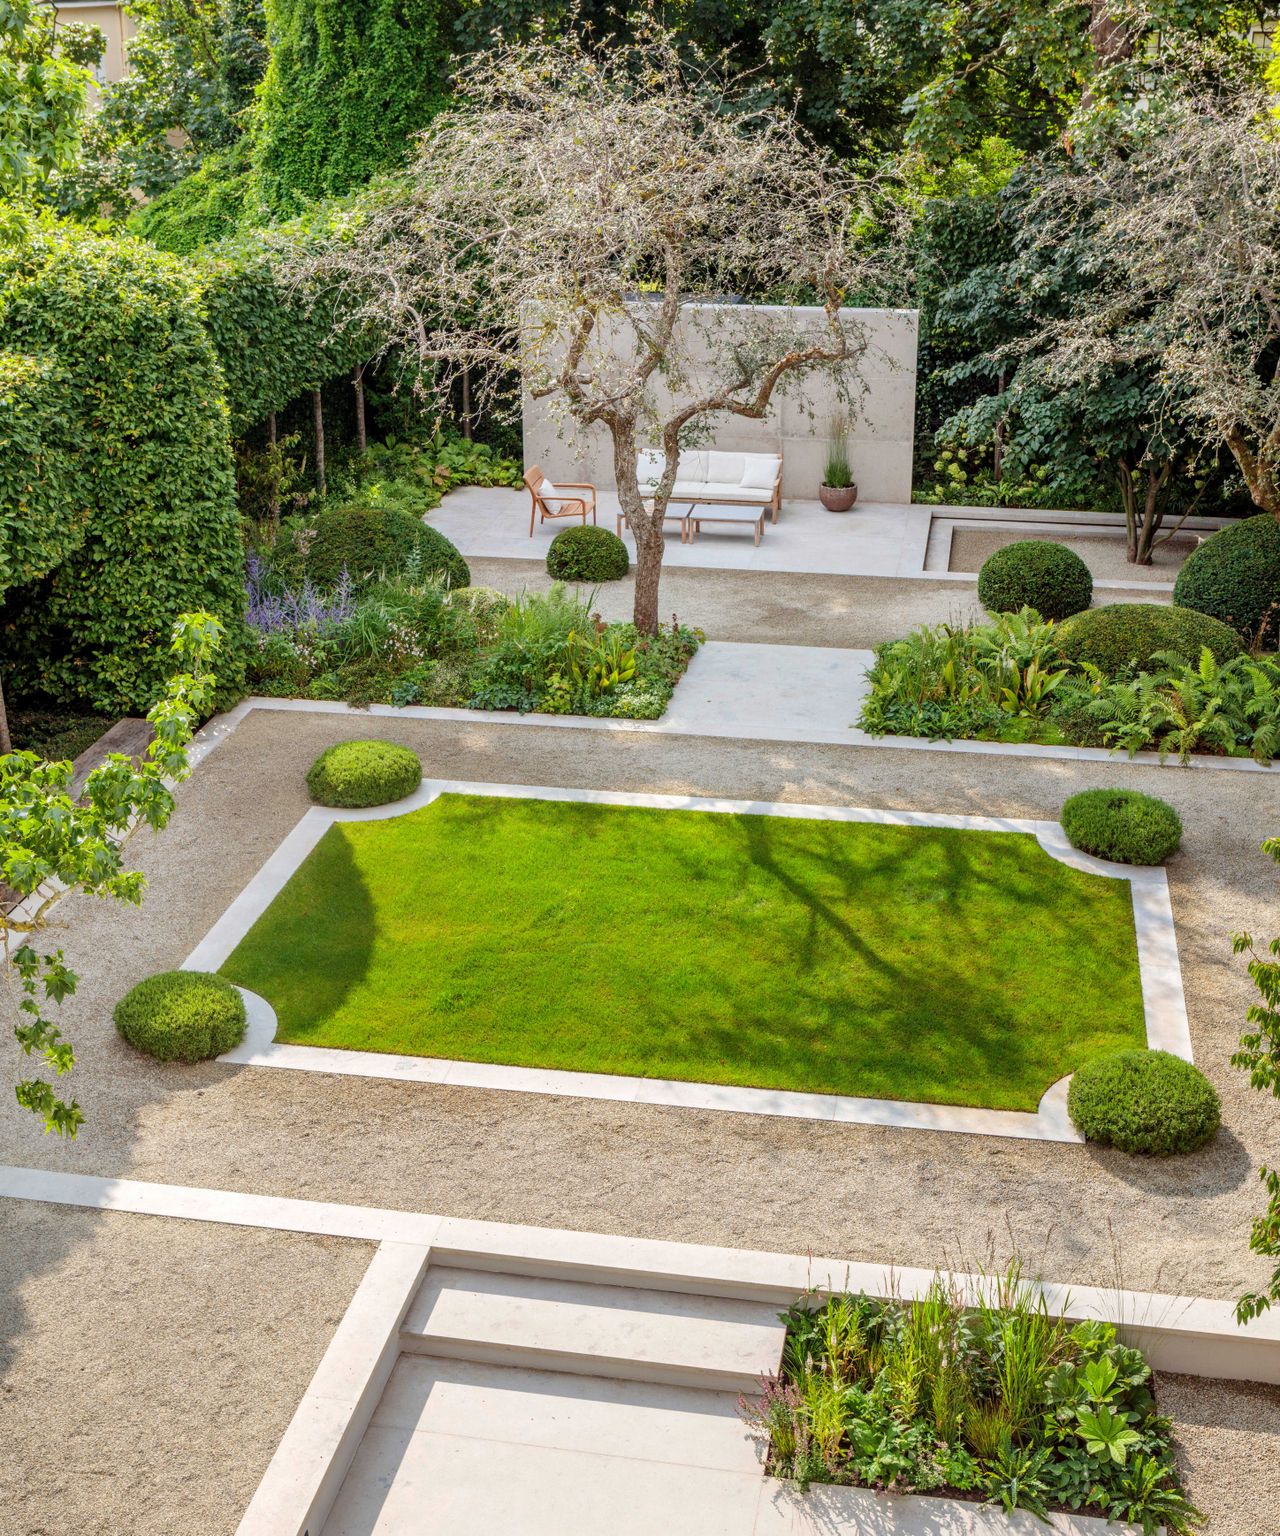 A minimalist city garden of outdoor rooms with innovative topiary